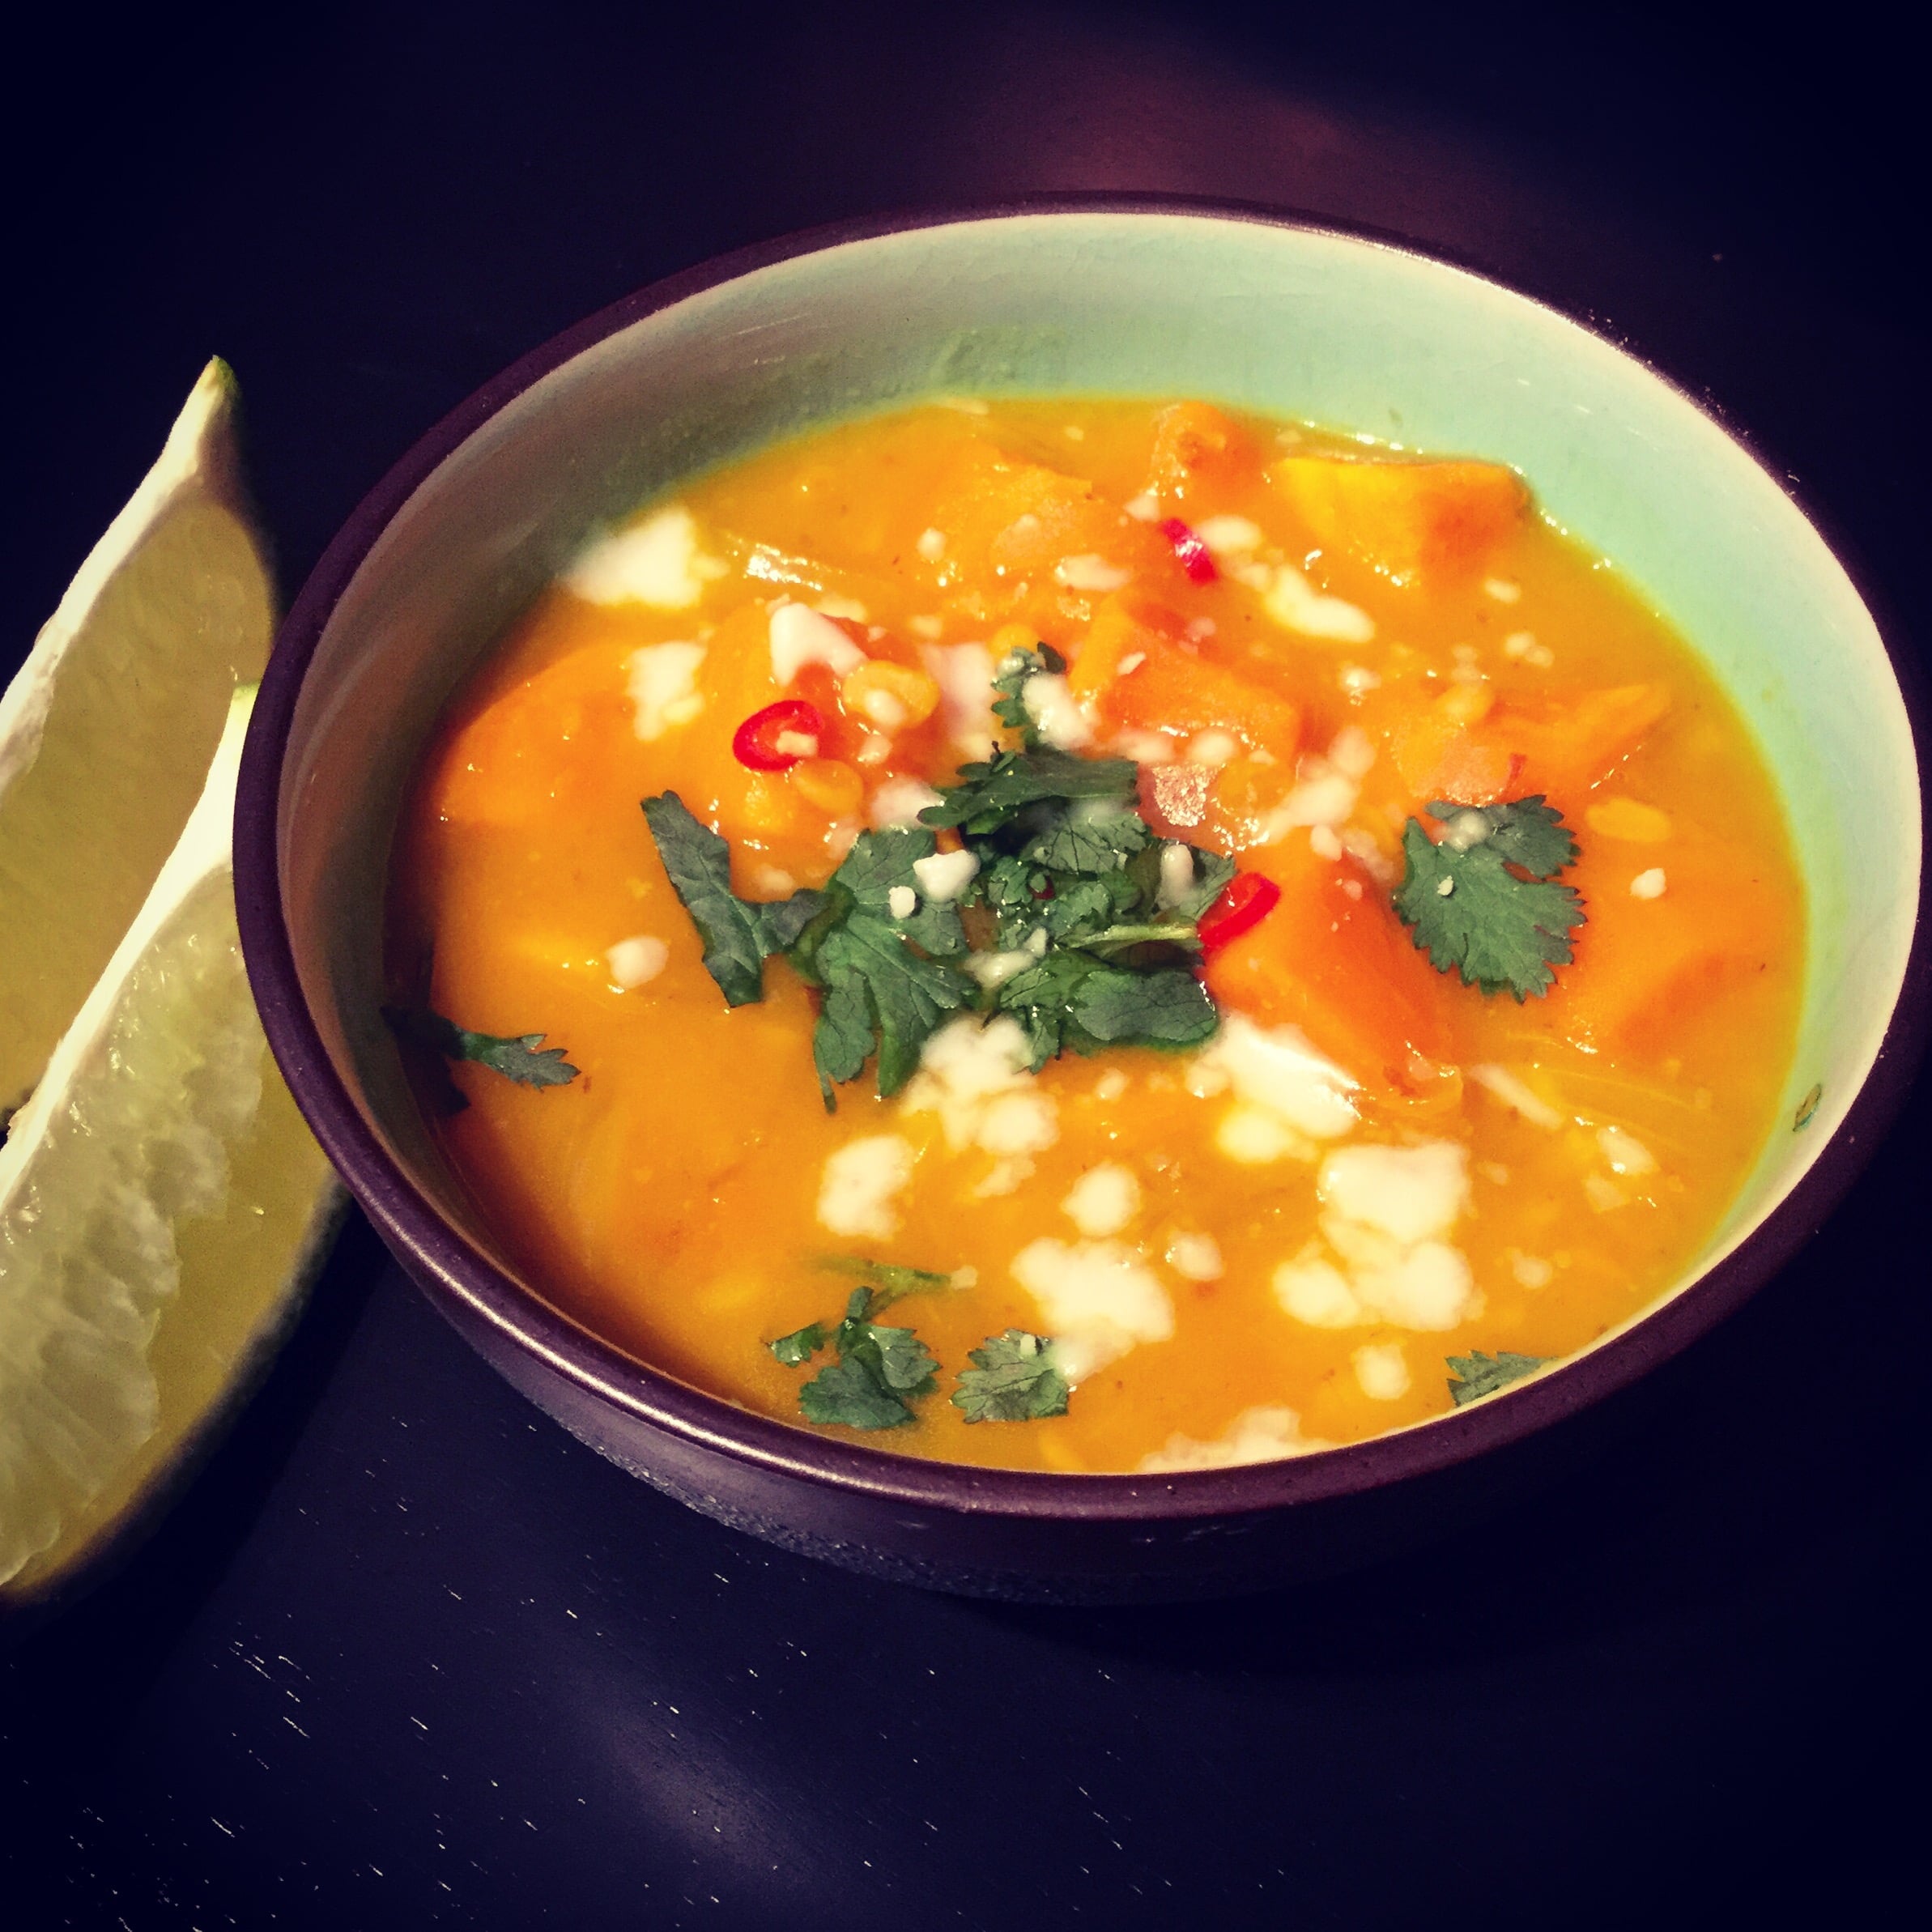 A bowl of Thai Sweet Potato and Lentil Curry with 2 wedges of fresh lime